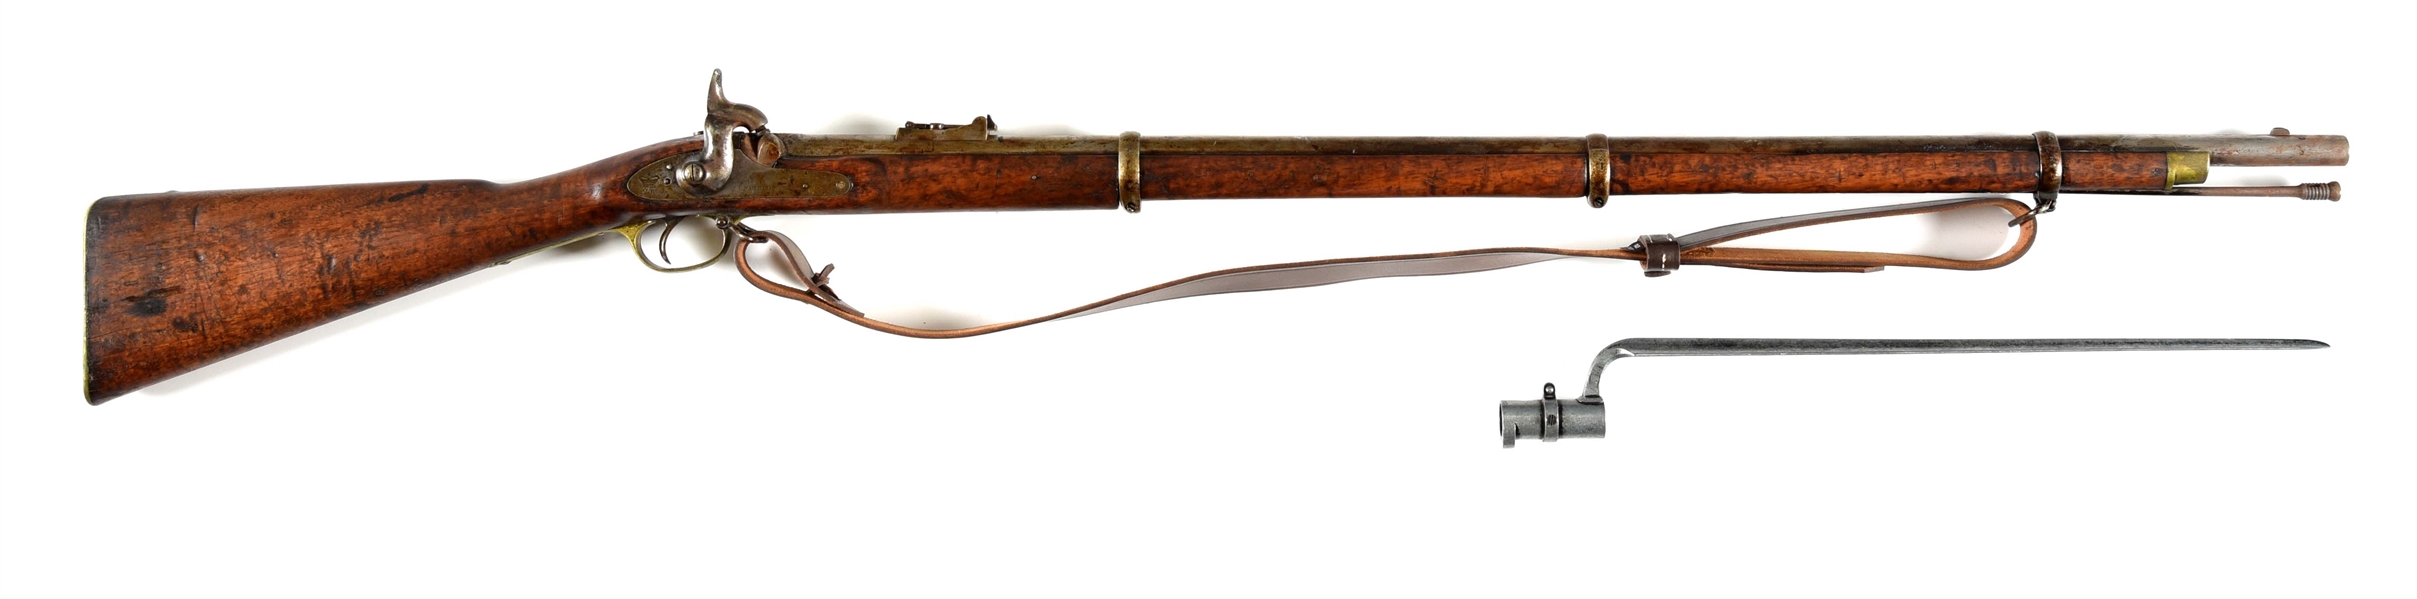 (A) ENFIELD P1853 PERCUSSION RIFLED MUSKET.